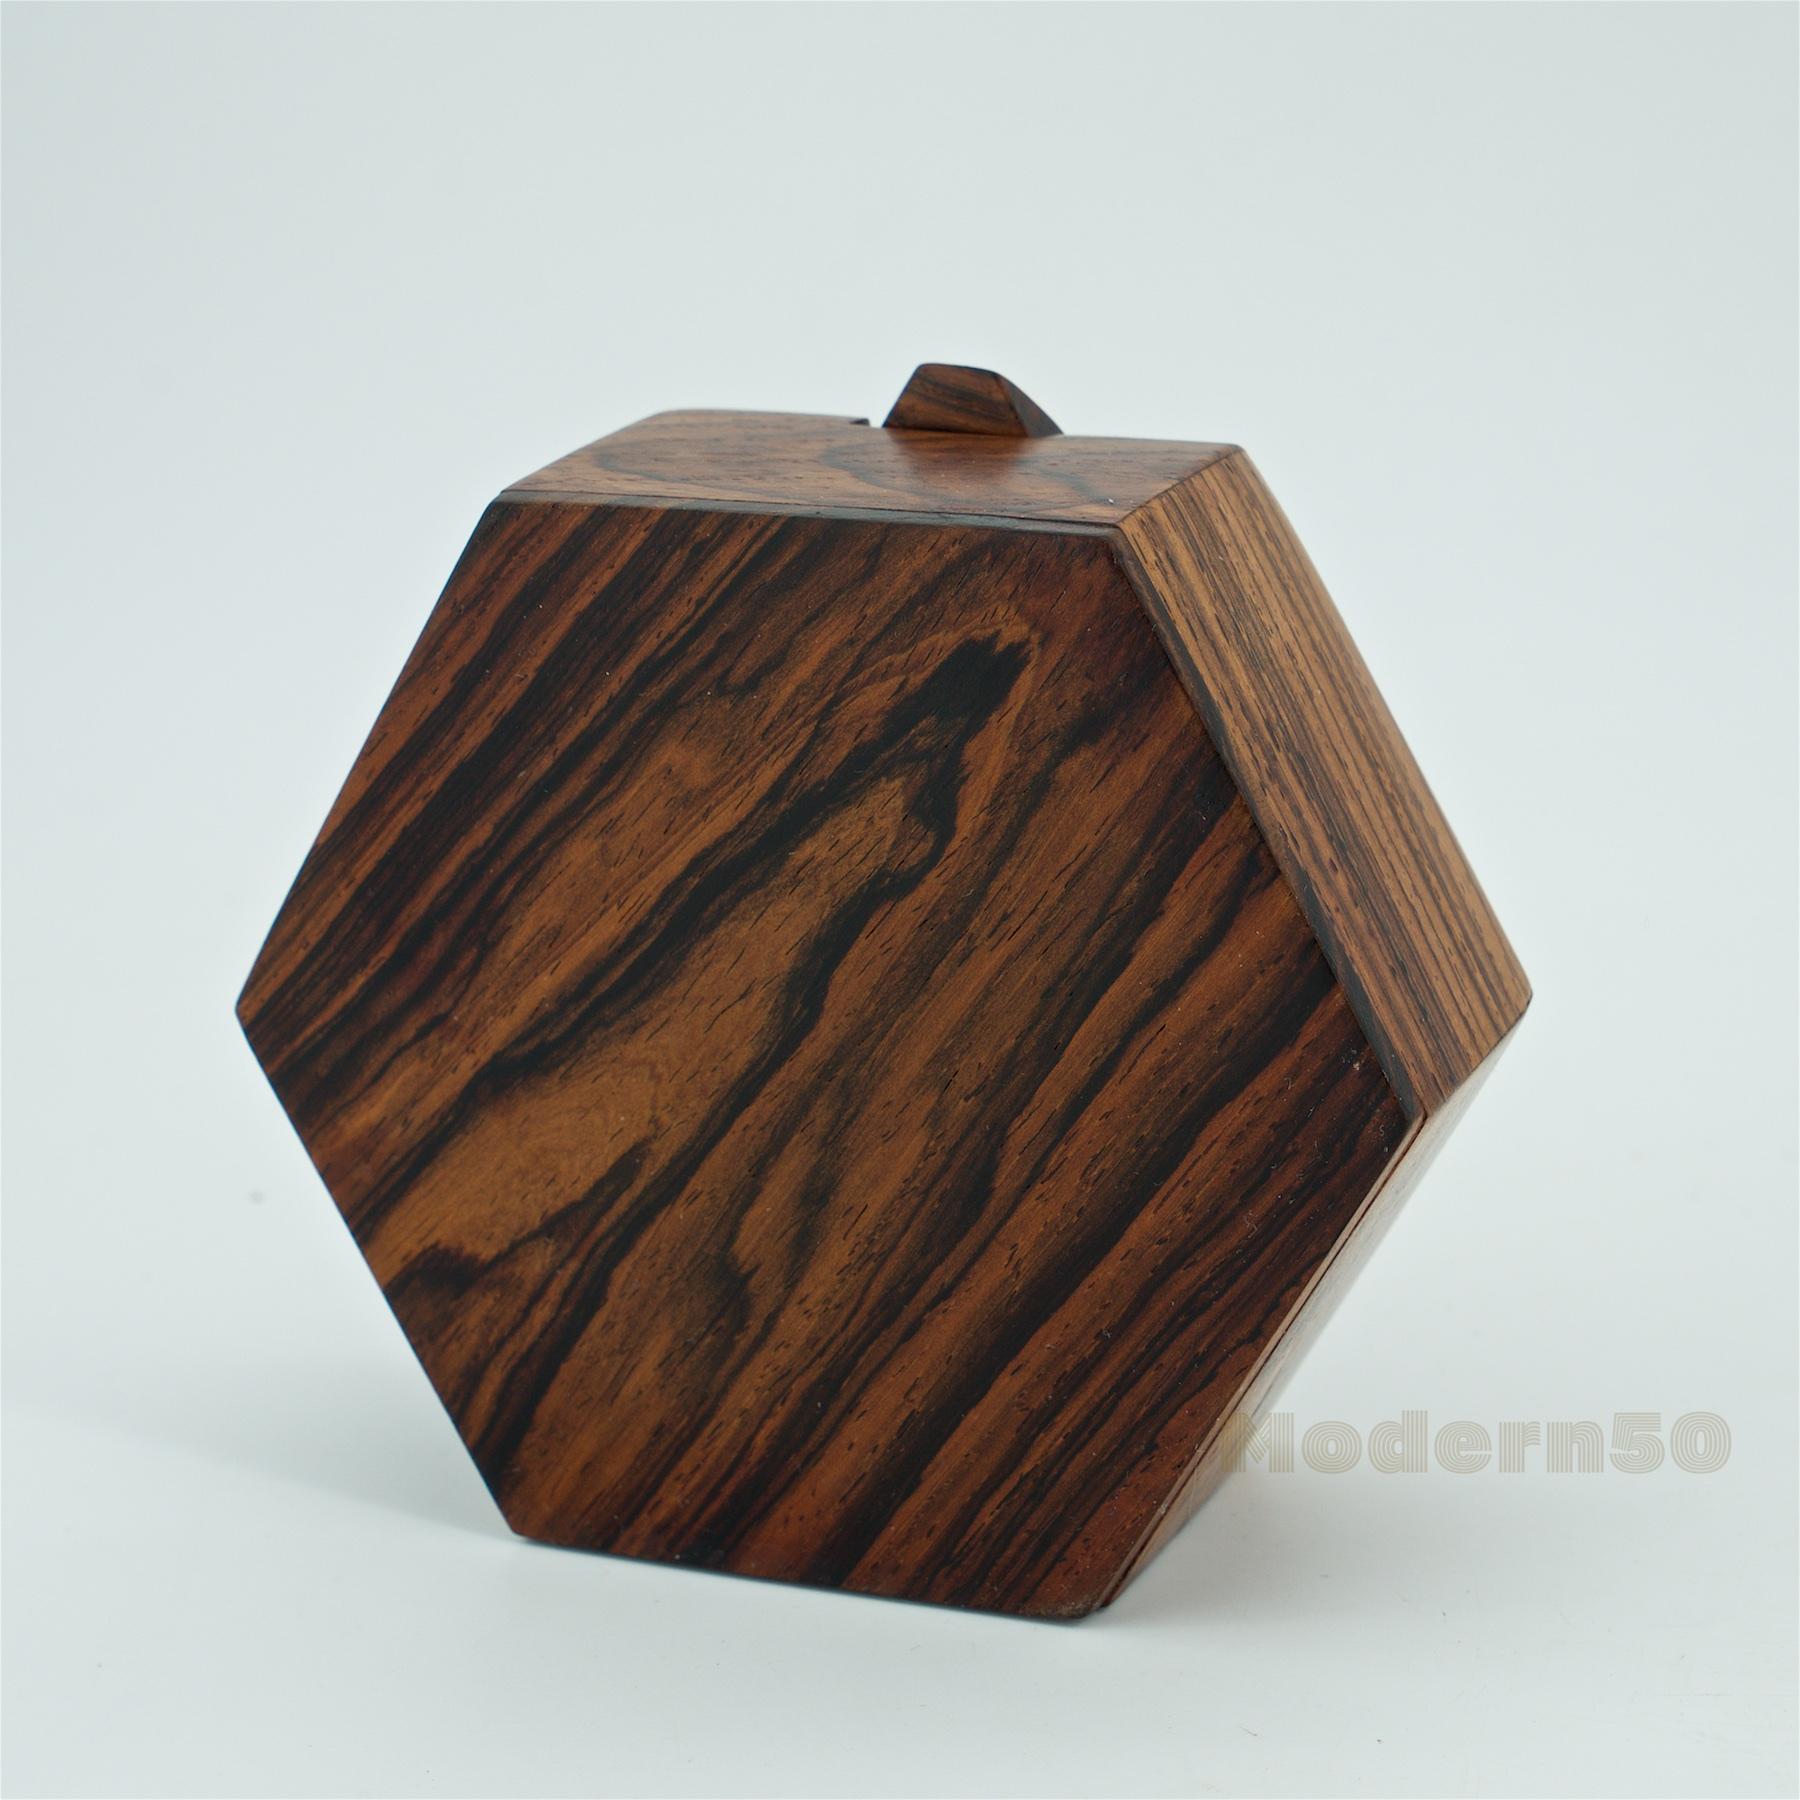 Cocobolo 1960s Geometric Jewelry Trinket Geometric Box Mexican Craft Eclectic Woodworker For Sale